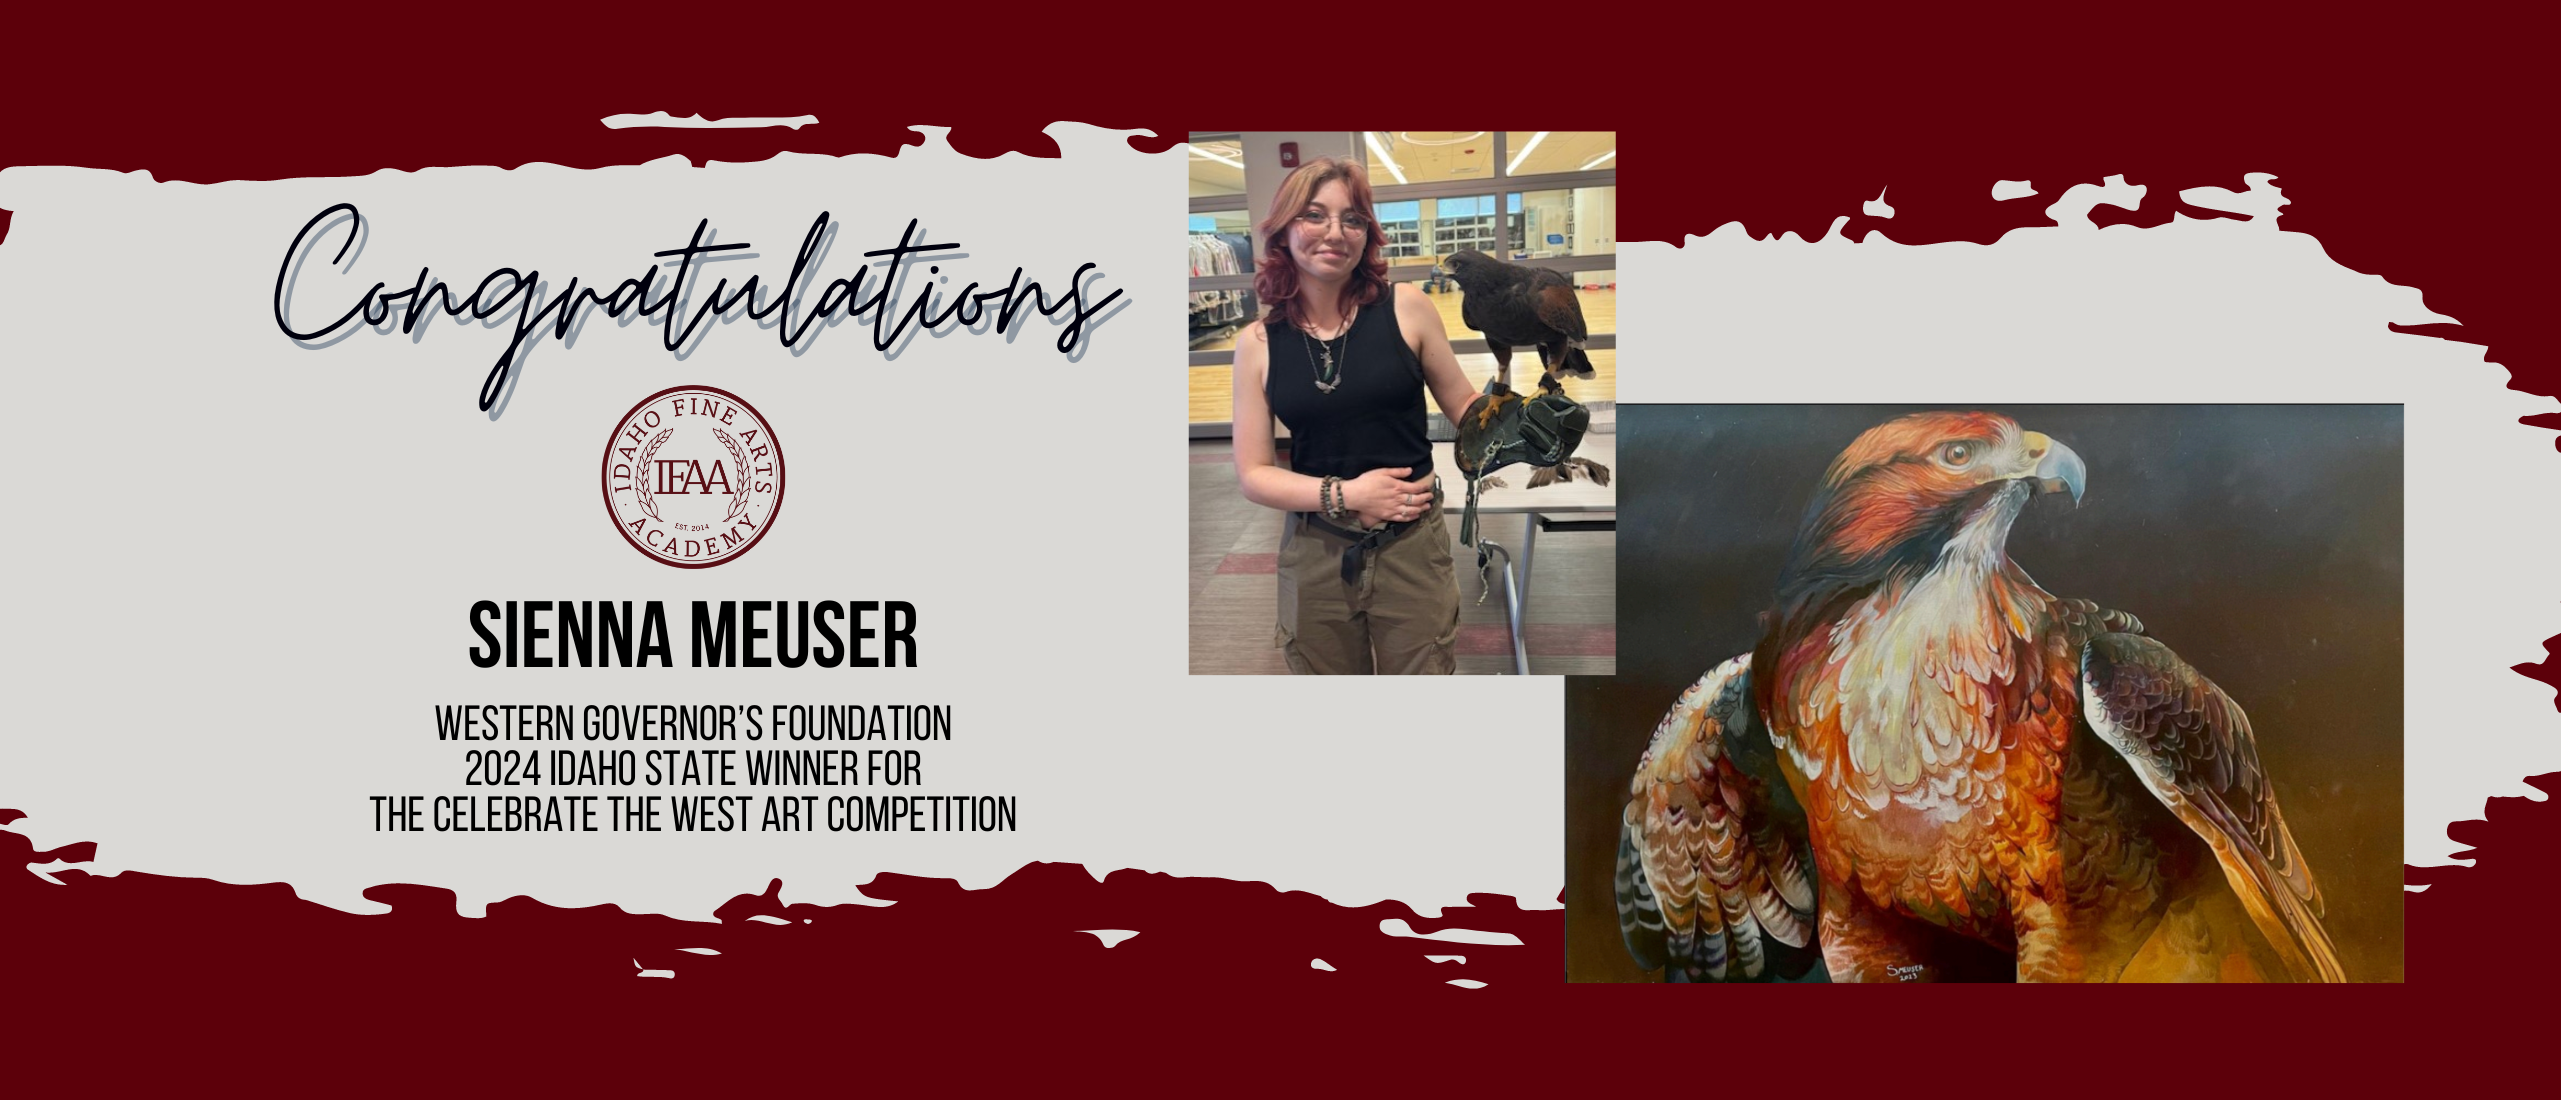 congratulations sienna meuser western governor's foundation 2024 idaho state winner for the celebrate the west art competition